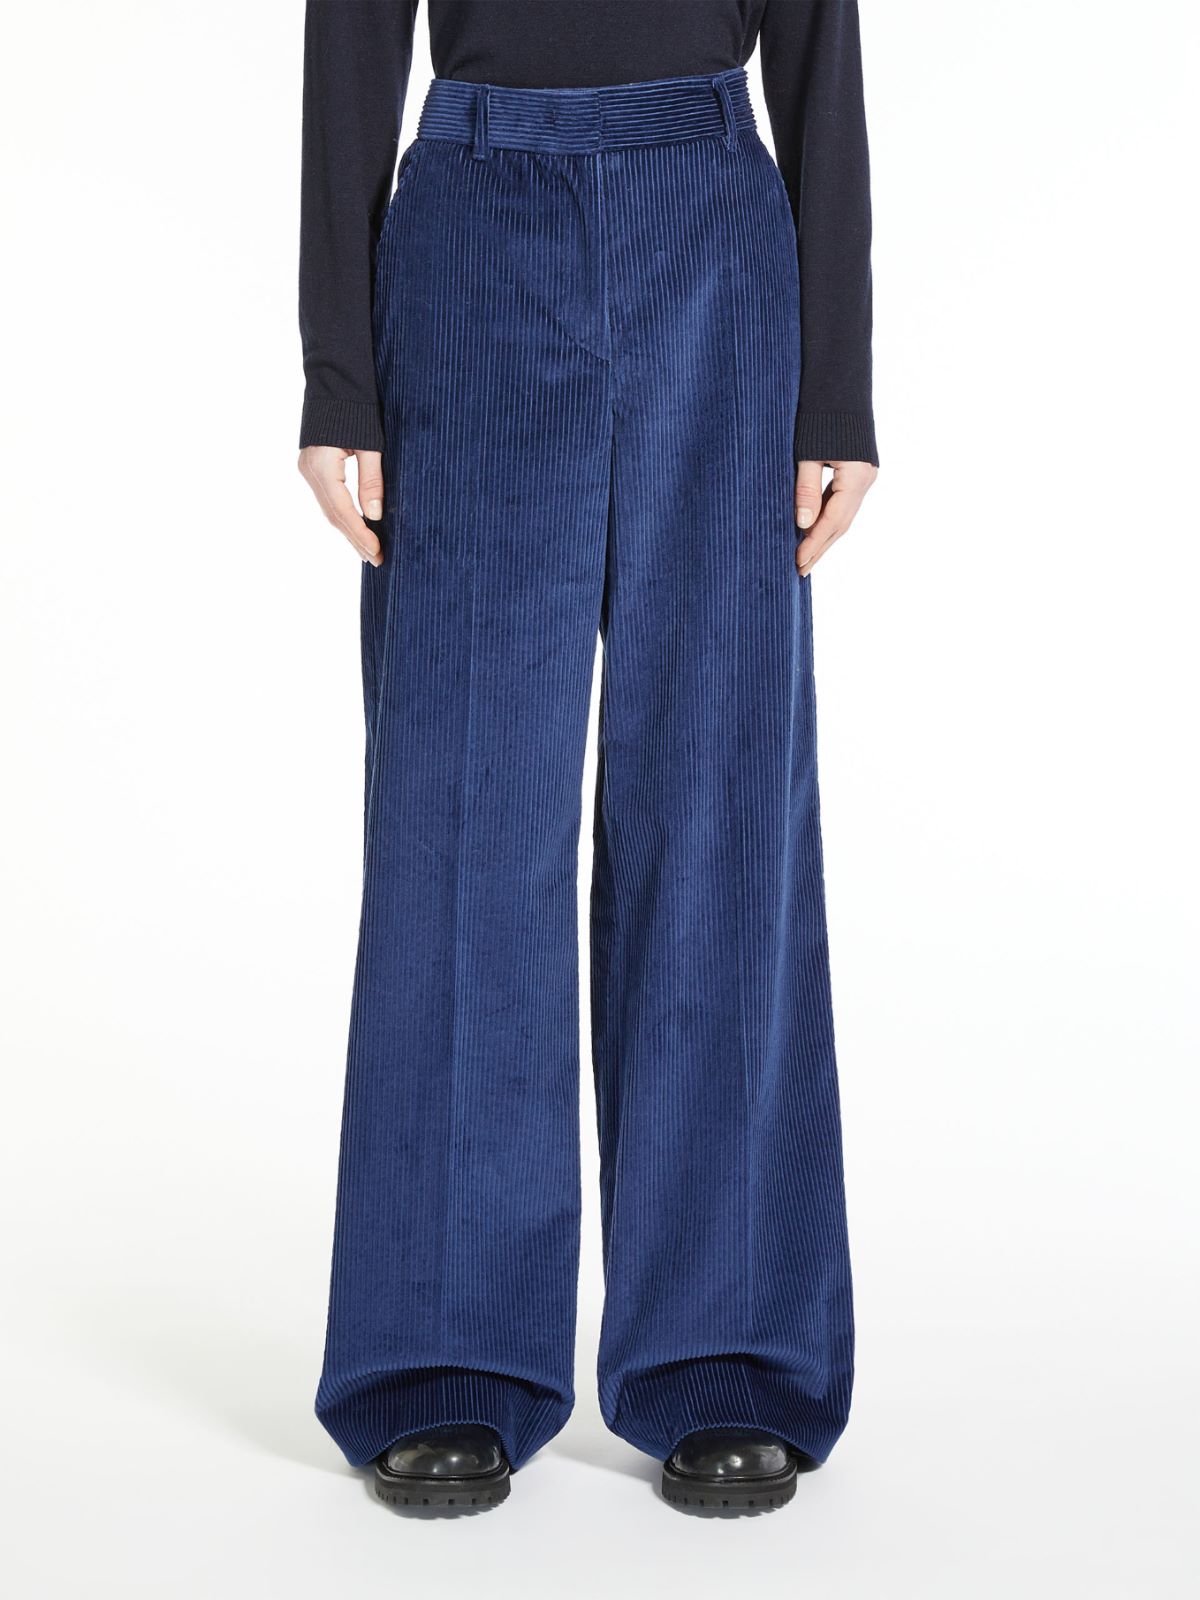 Cotton velvet trousers - CHINA BLUE - Weekend Max Mara - 2